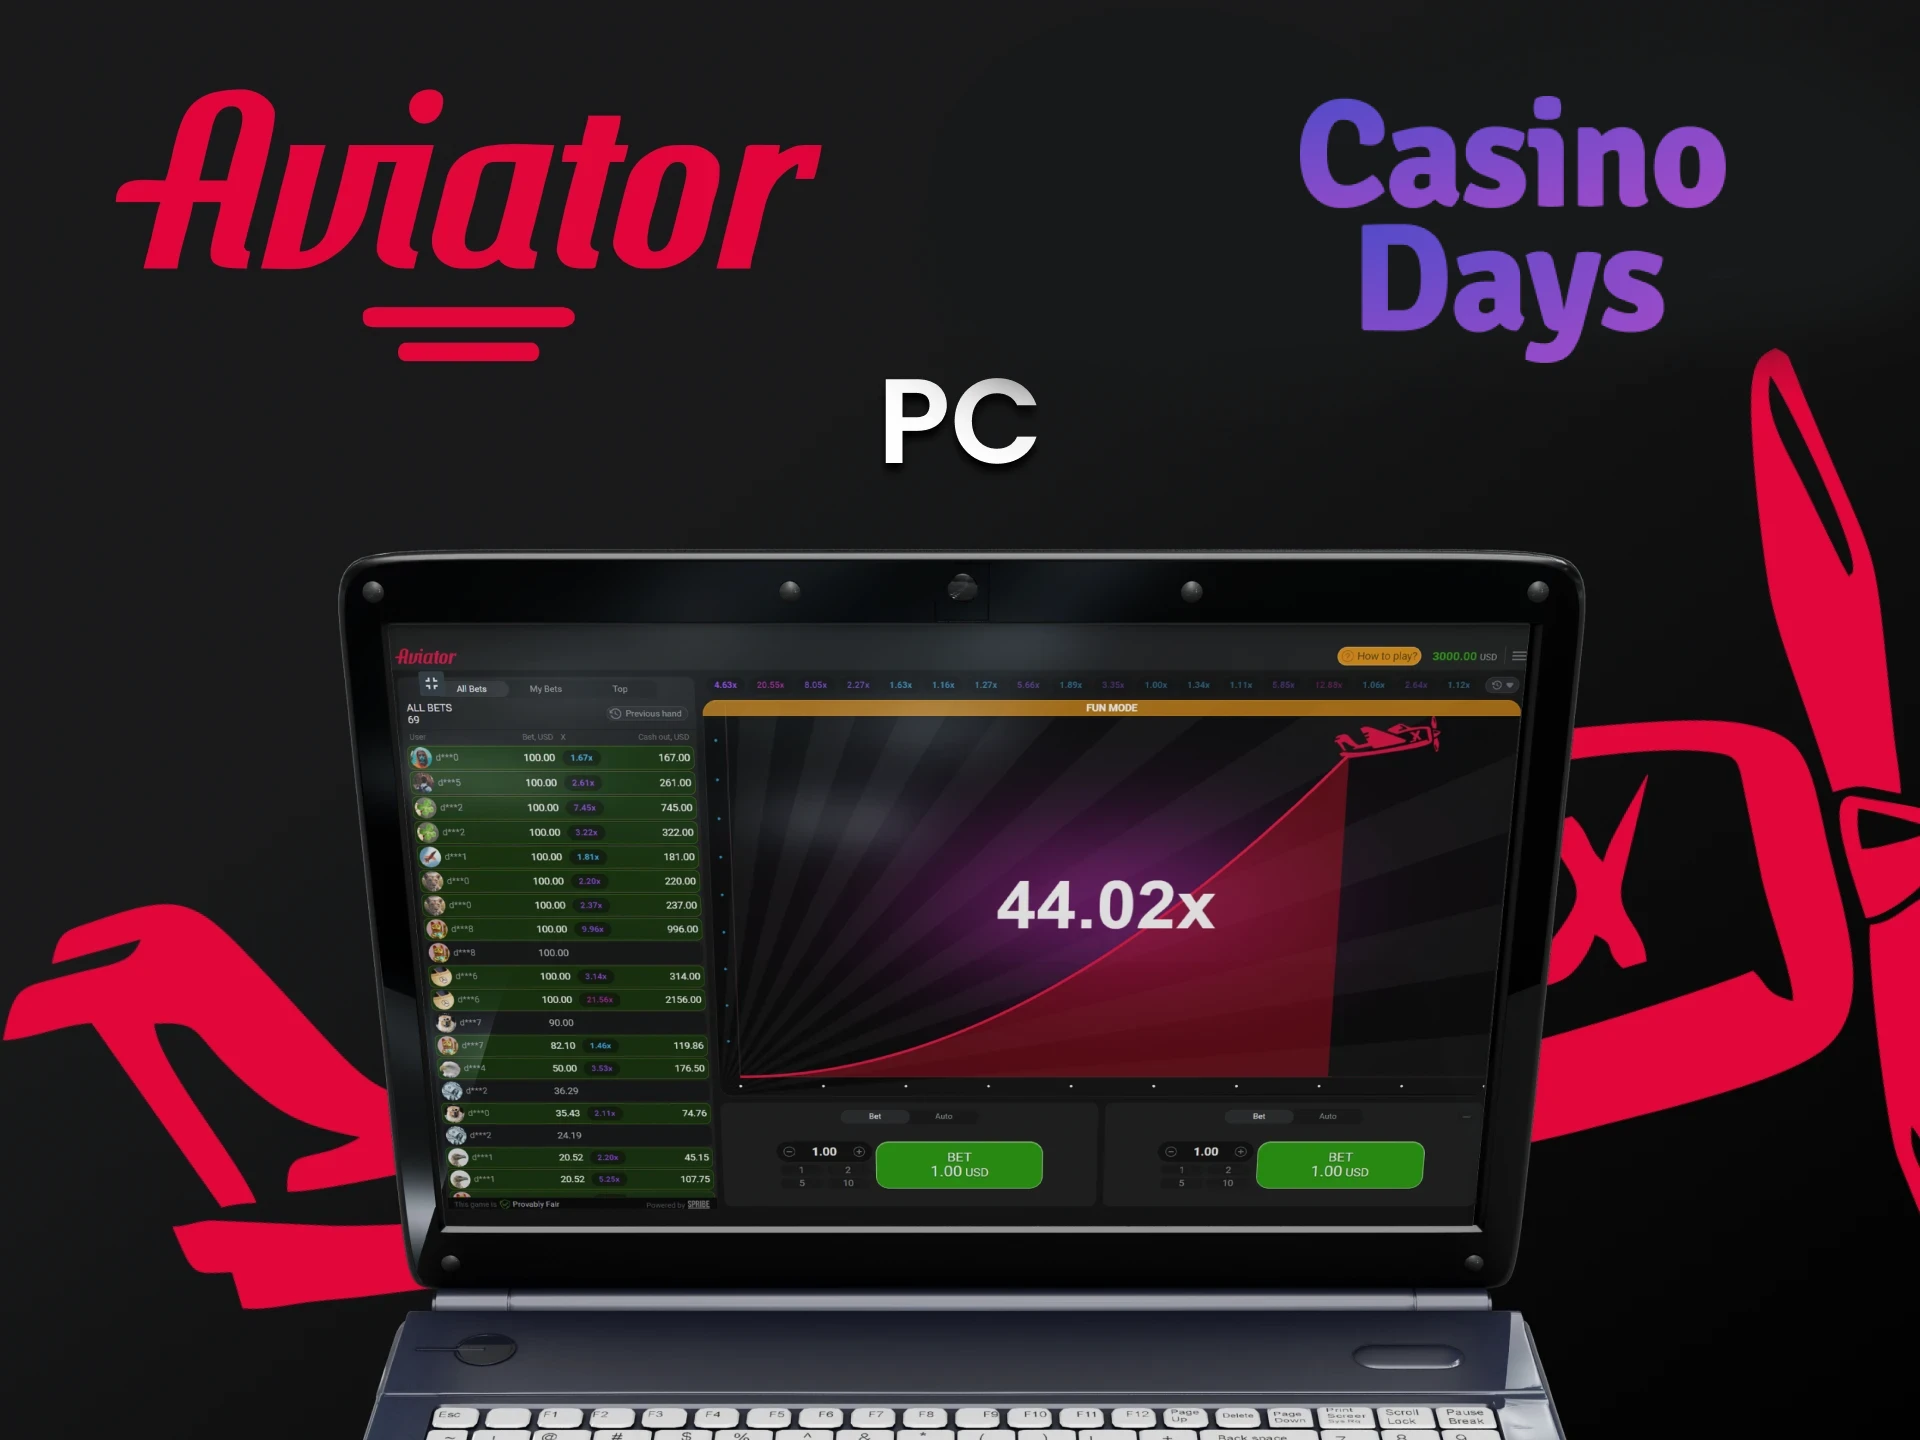 Use your PC to play Aviator at Casino Days.